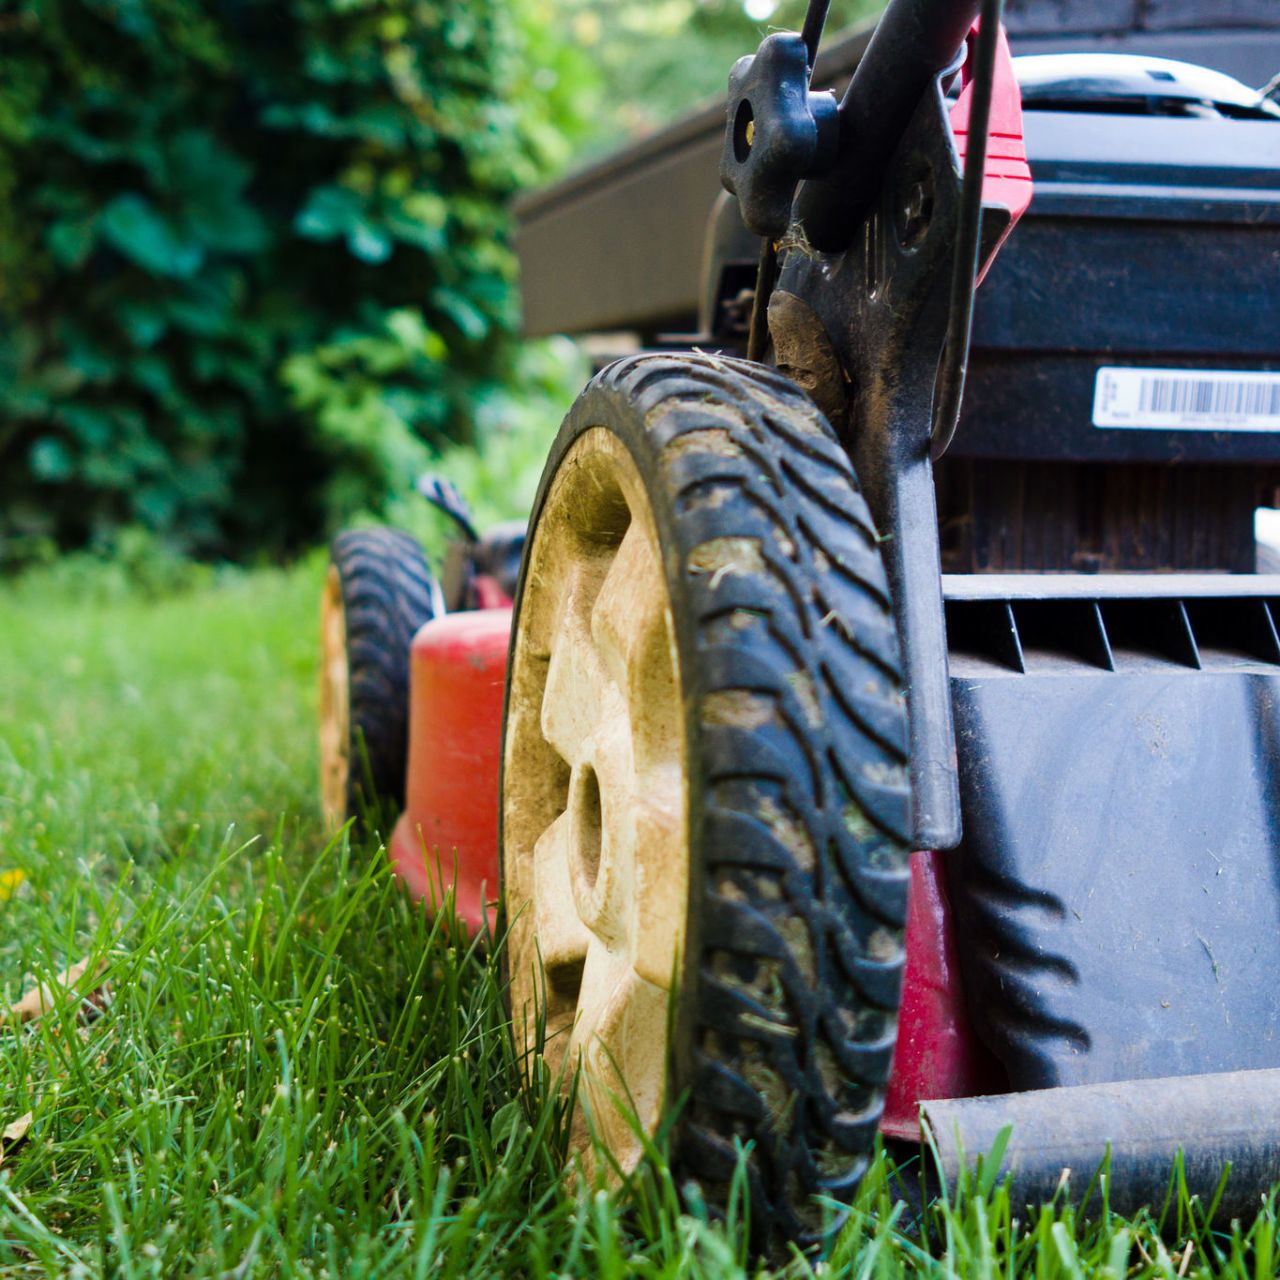 How to Repair Your Lawn Mower